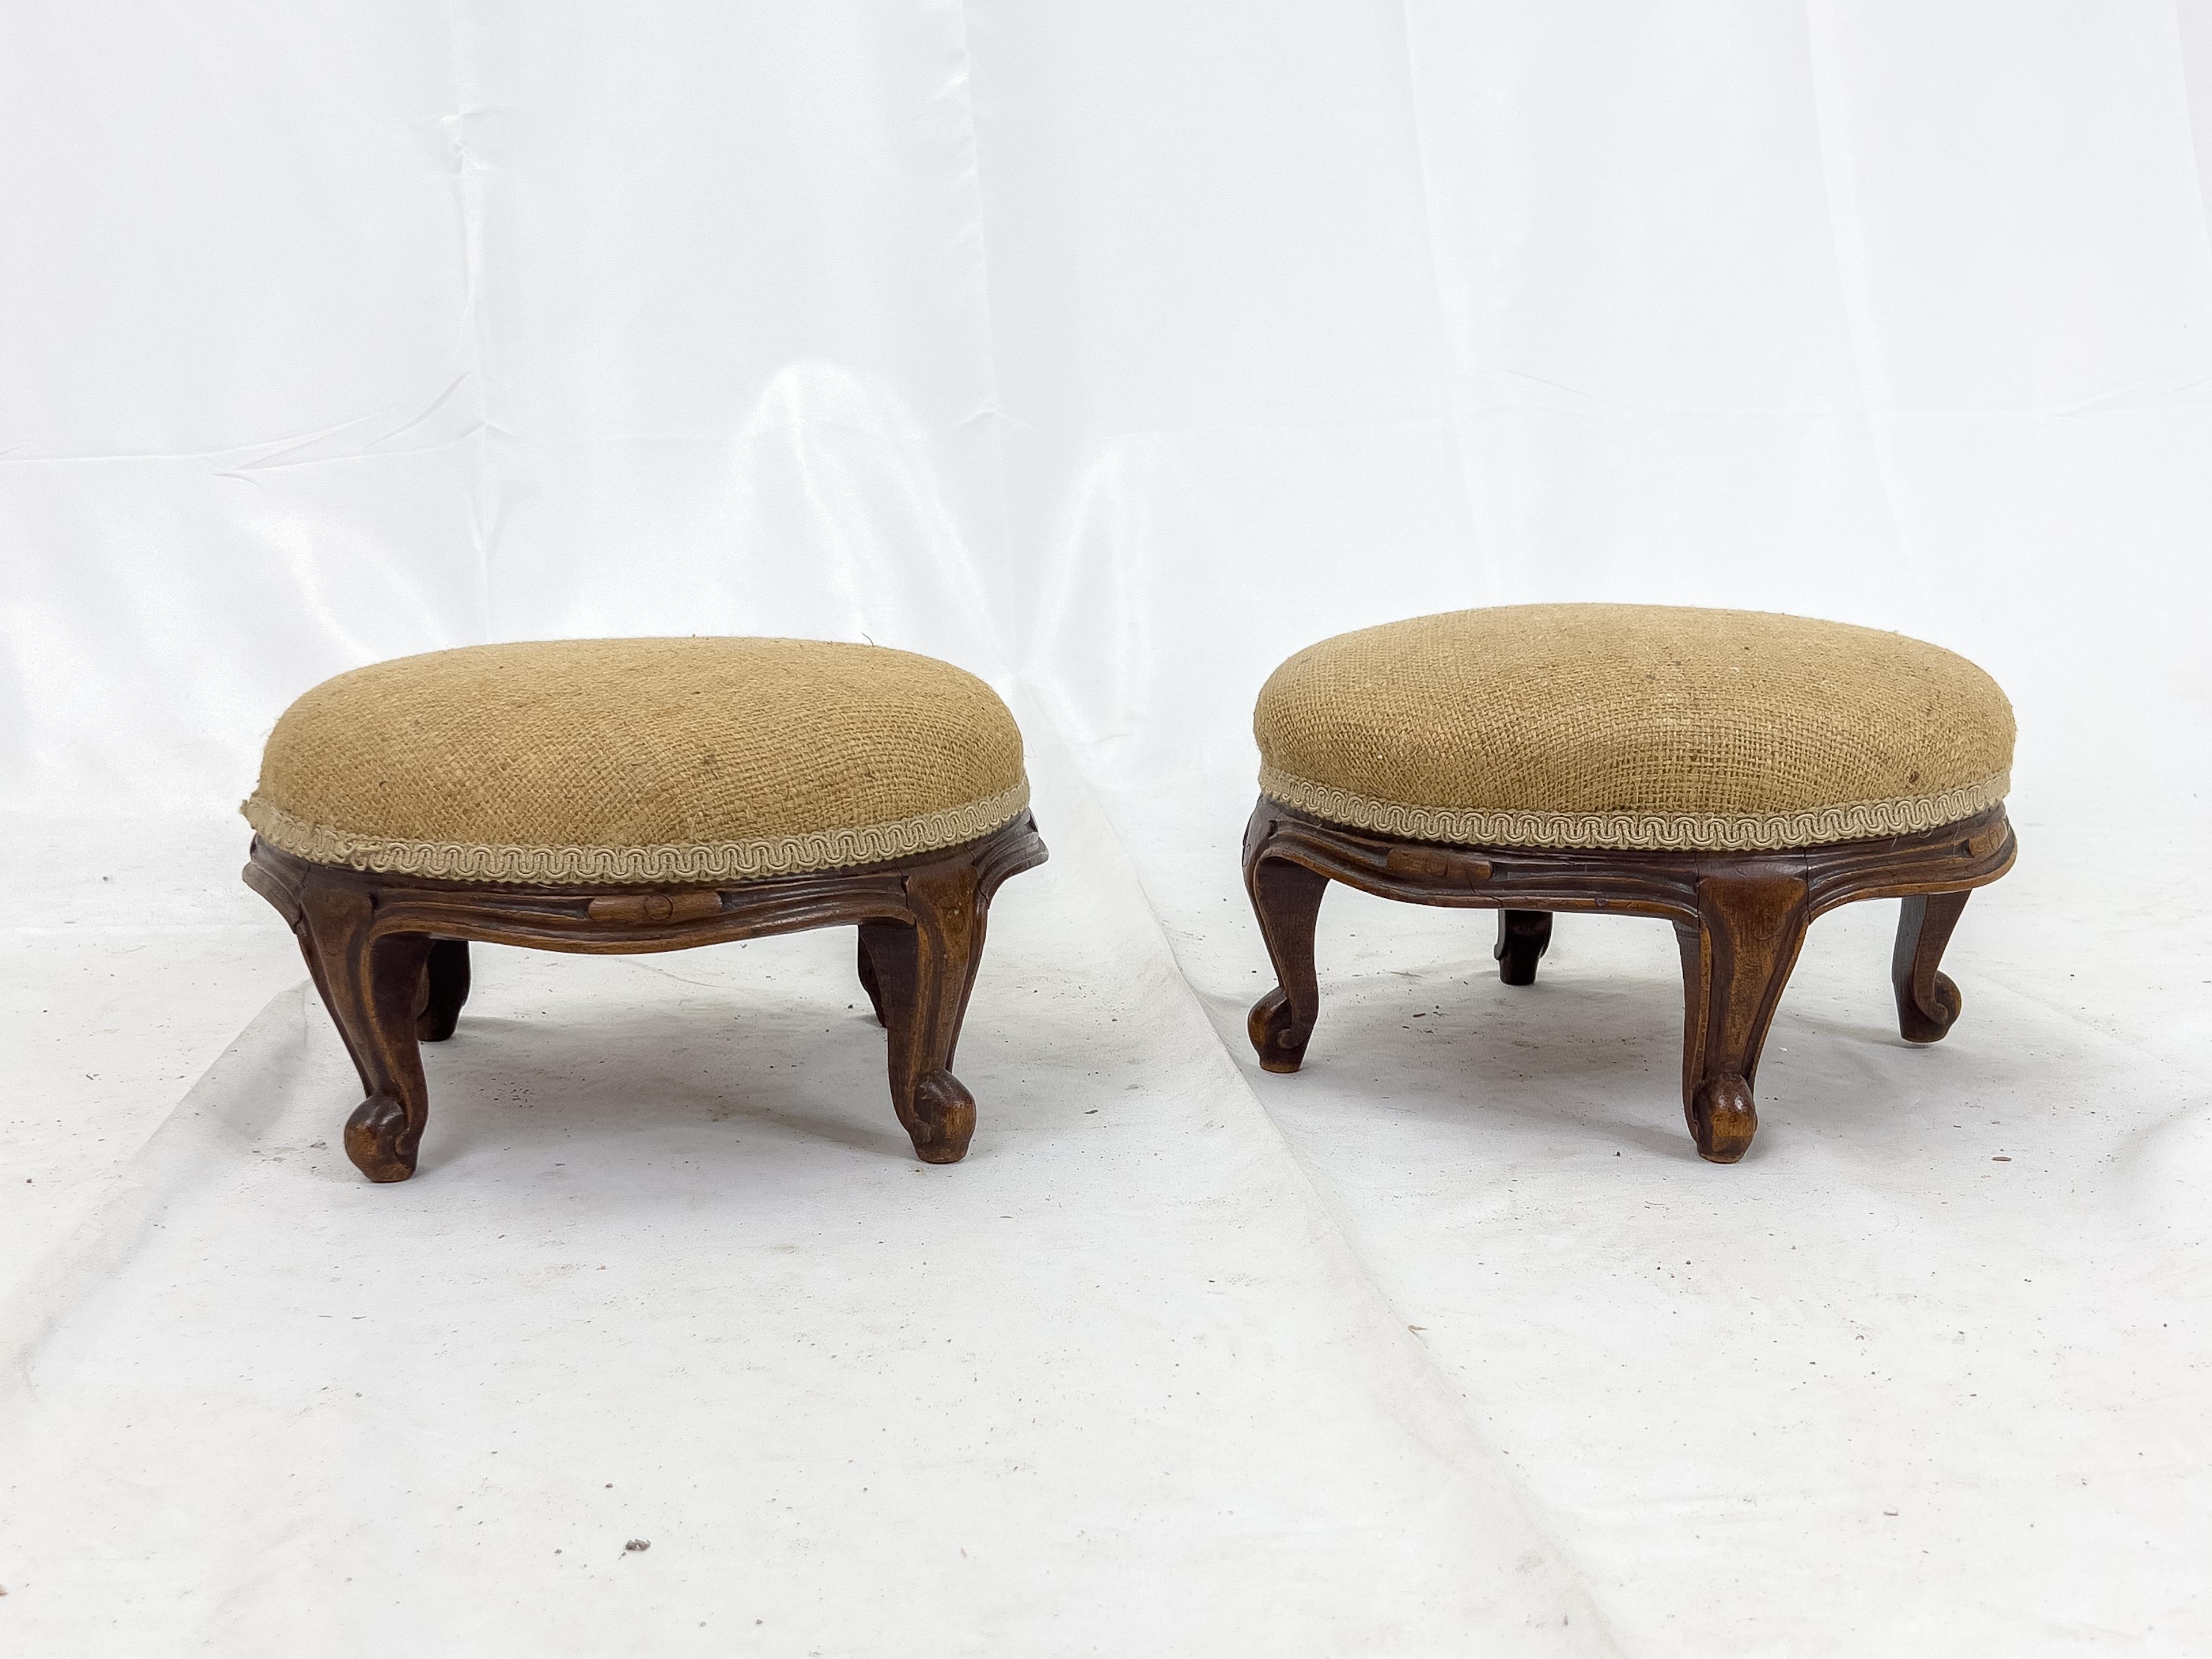 Carved Pair of Small 19th Century Louis XV Style French Walnut and Burlap Foot Stools